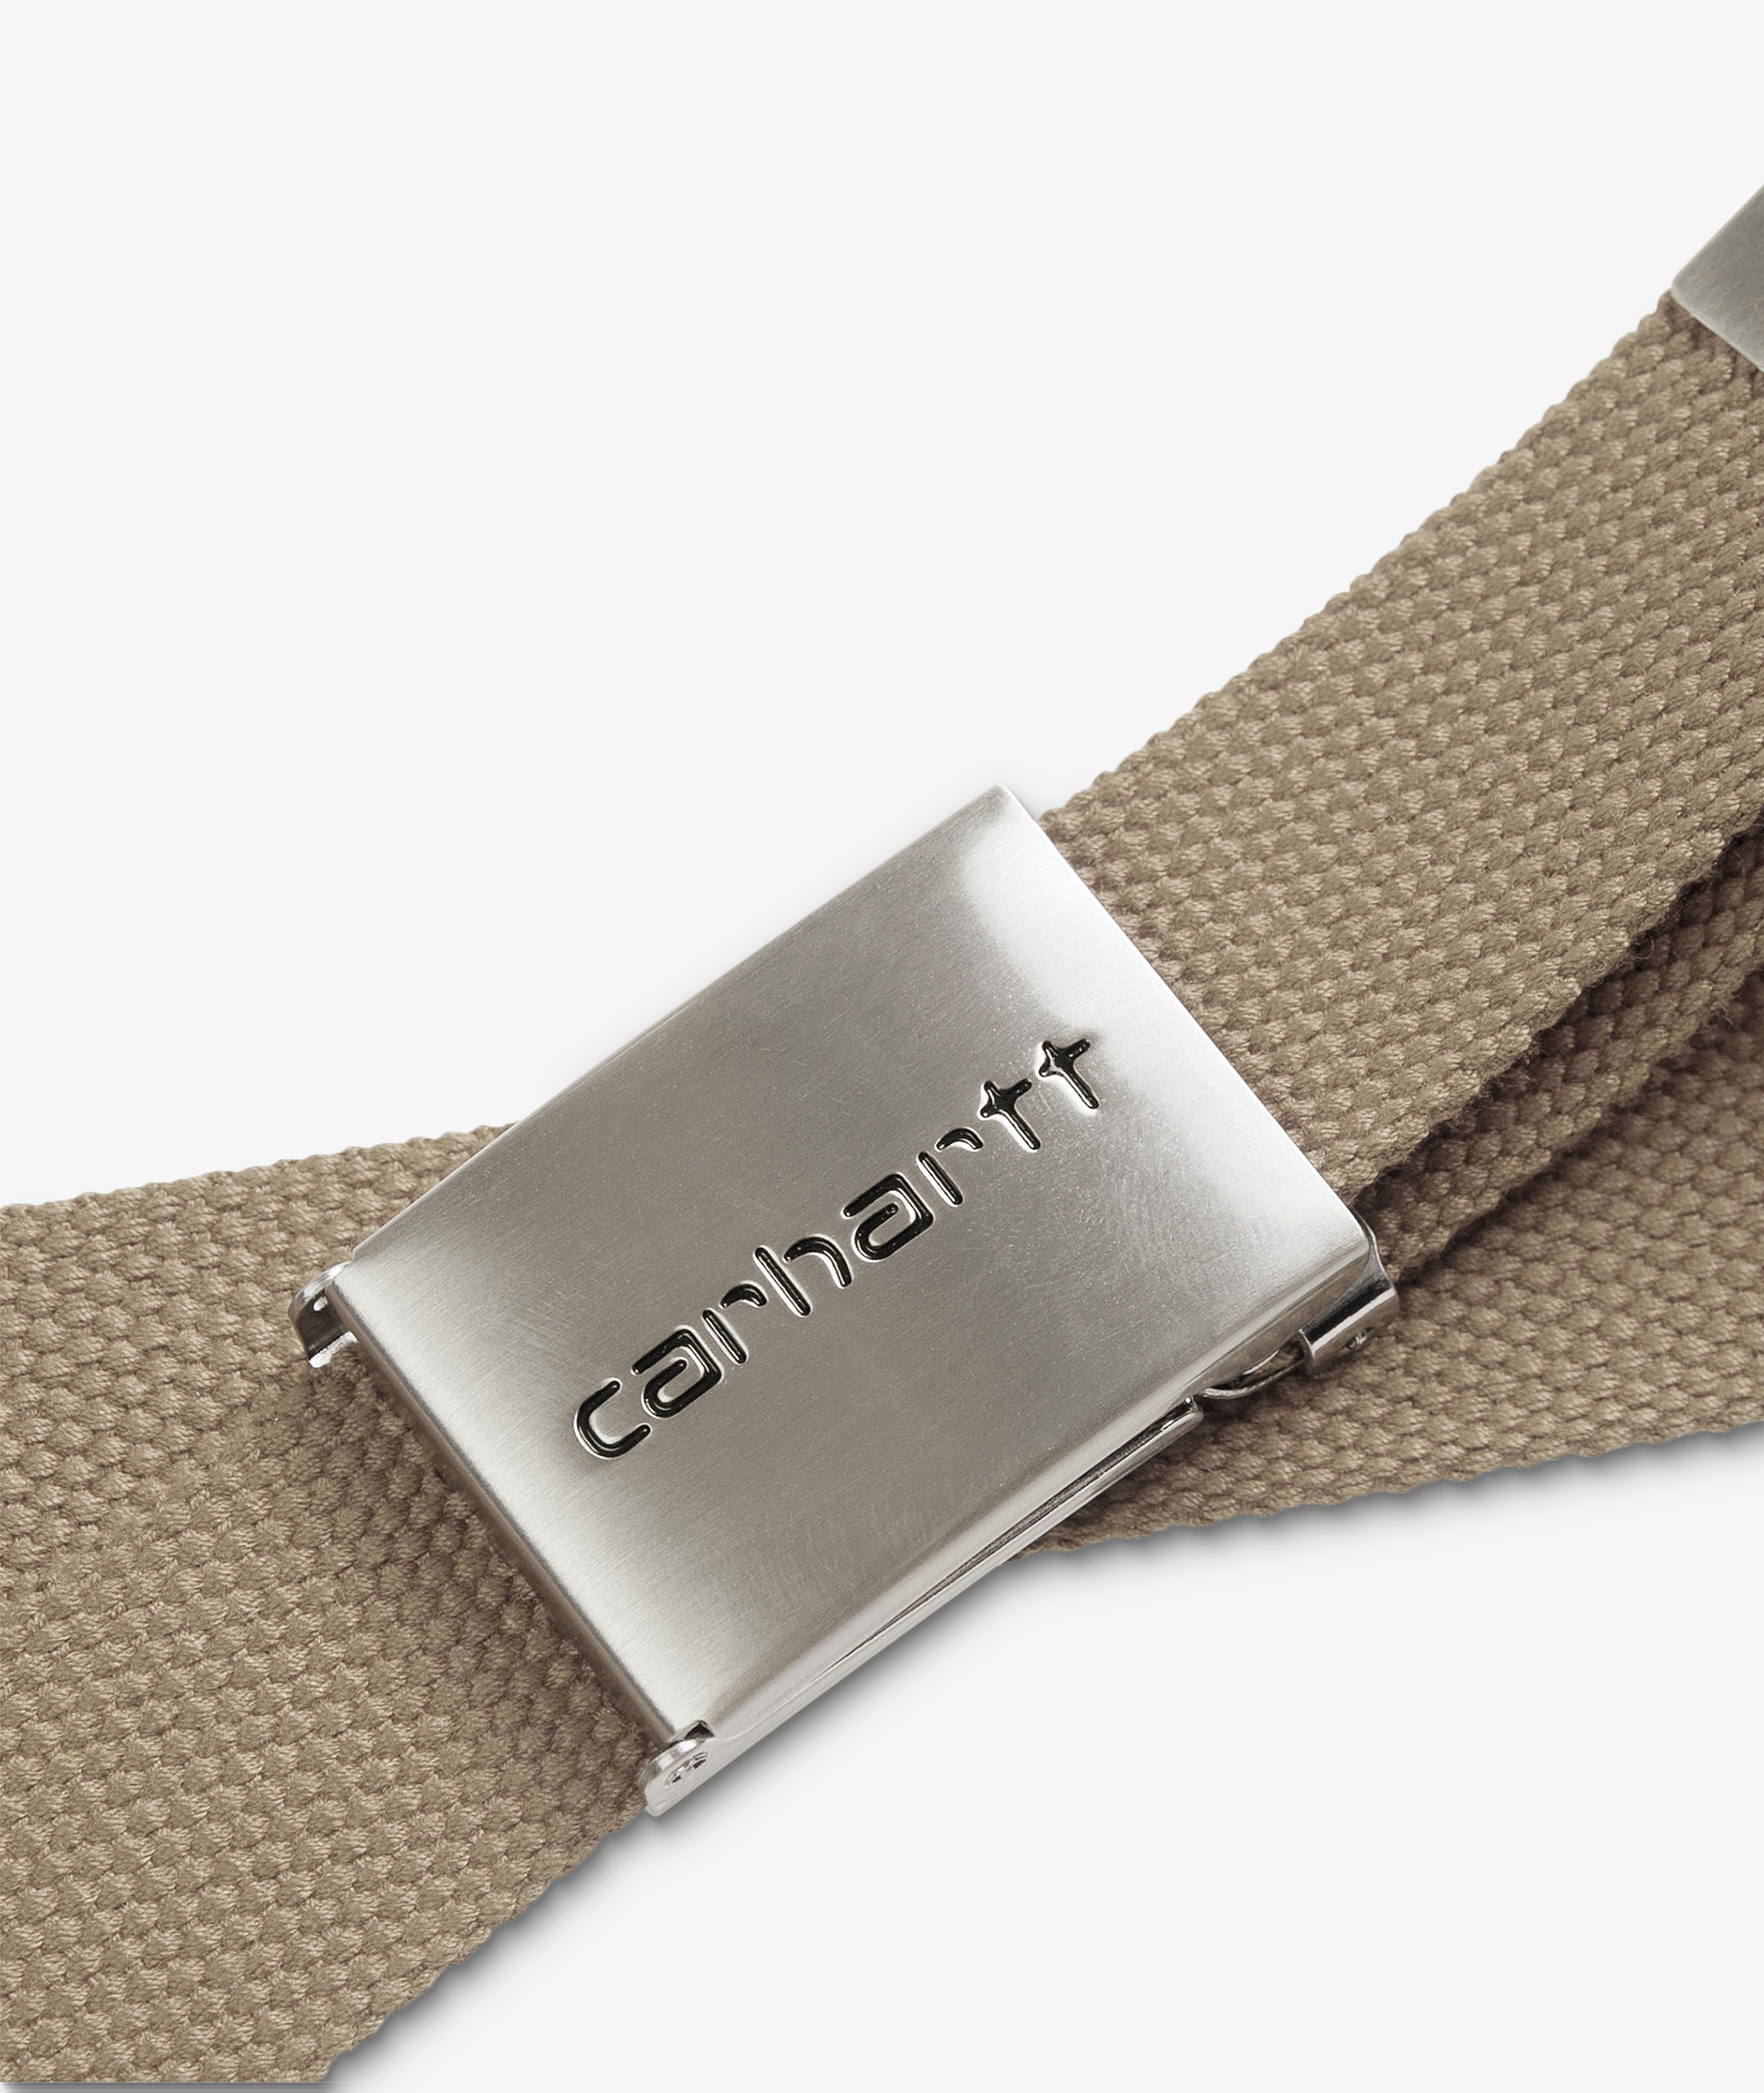 Norse Store | Shipping Worldwide - Carhartt WIP Clip Belt Chrome - Leather